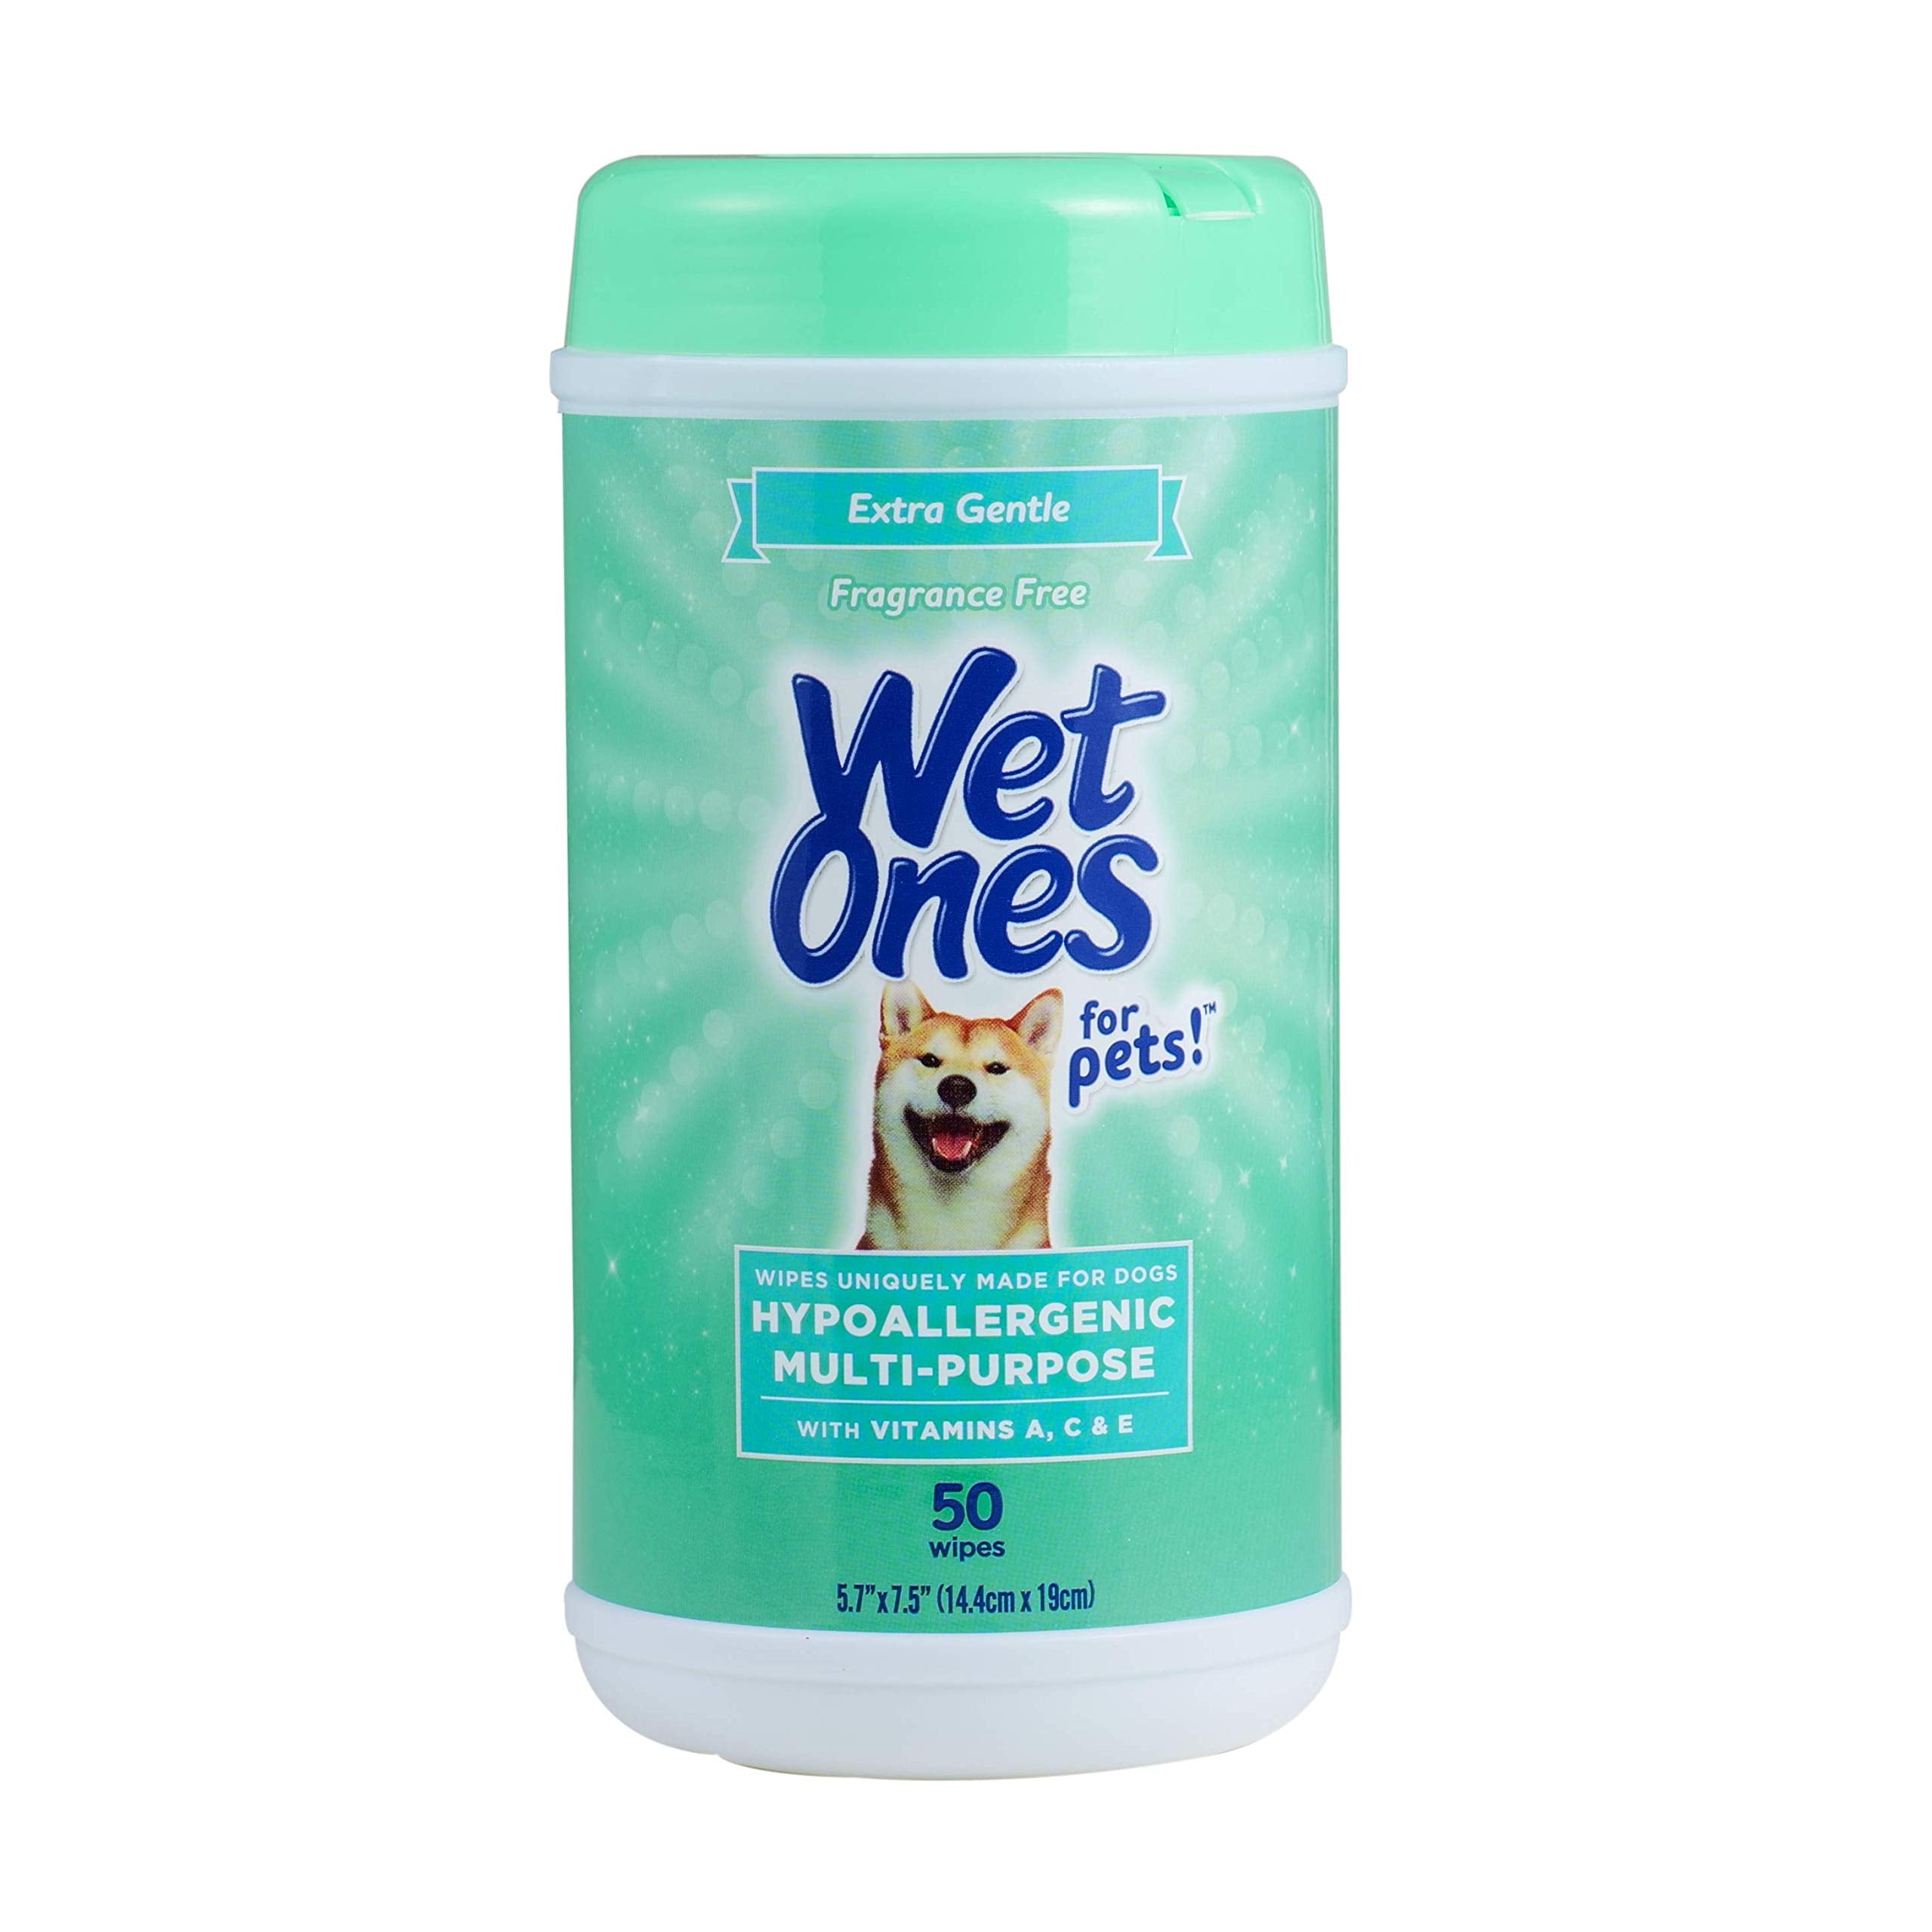 Wet Ones for Pets Multi-Purpose Dog Wipes with Vitamins A, C + E